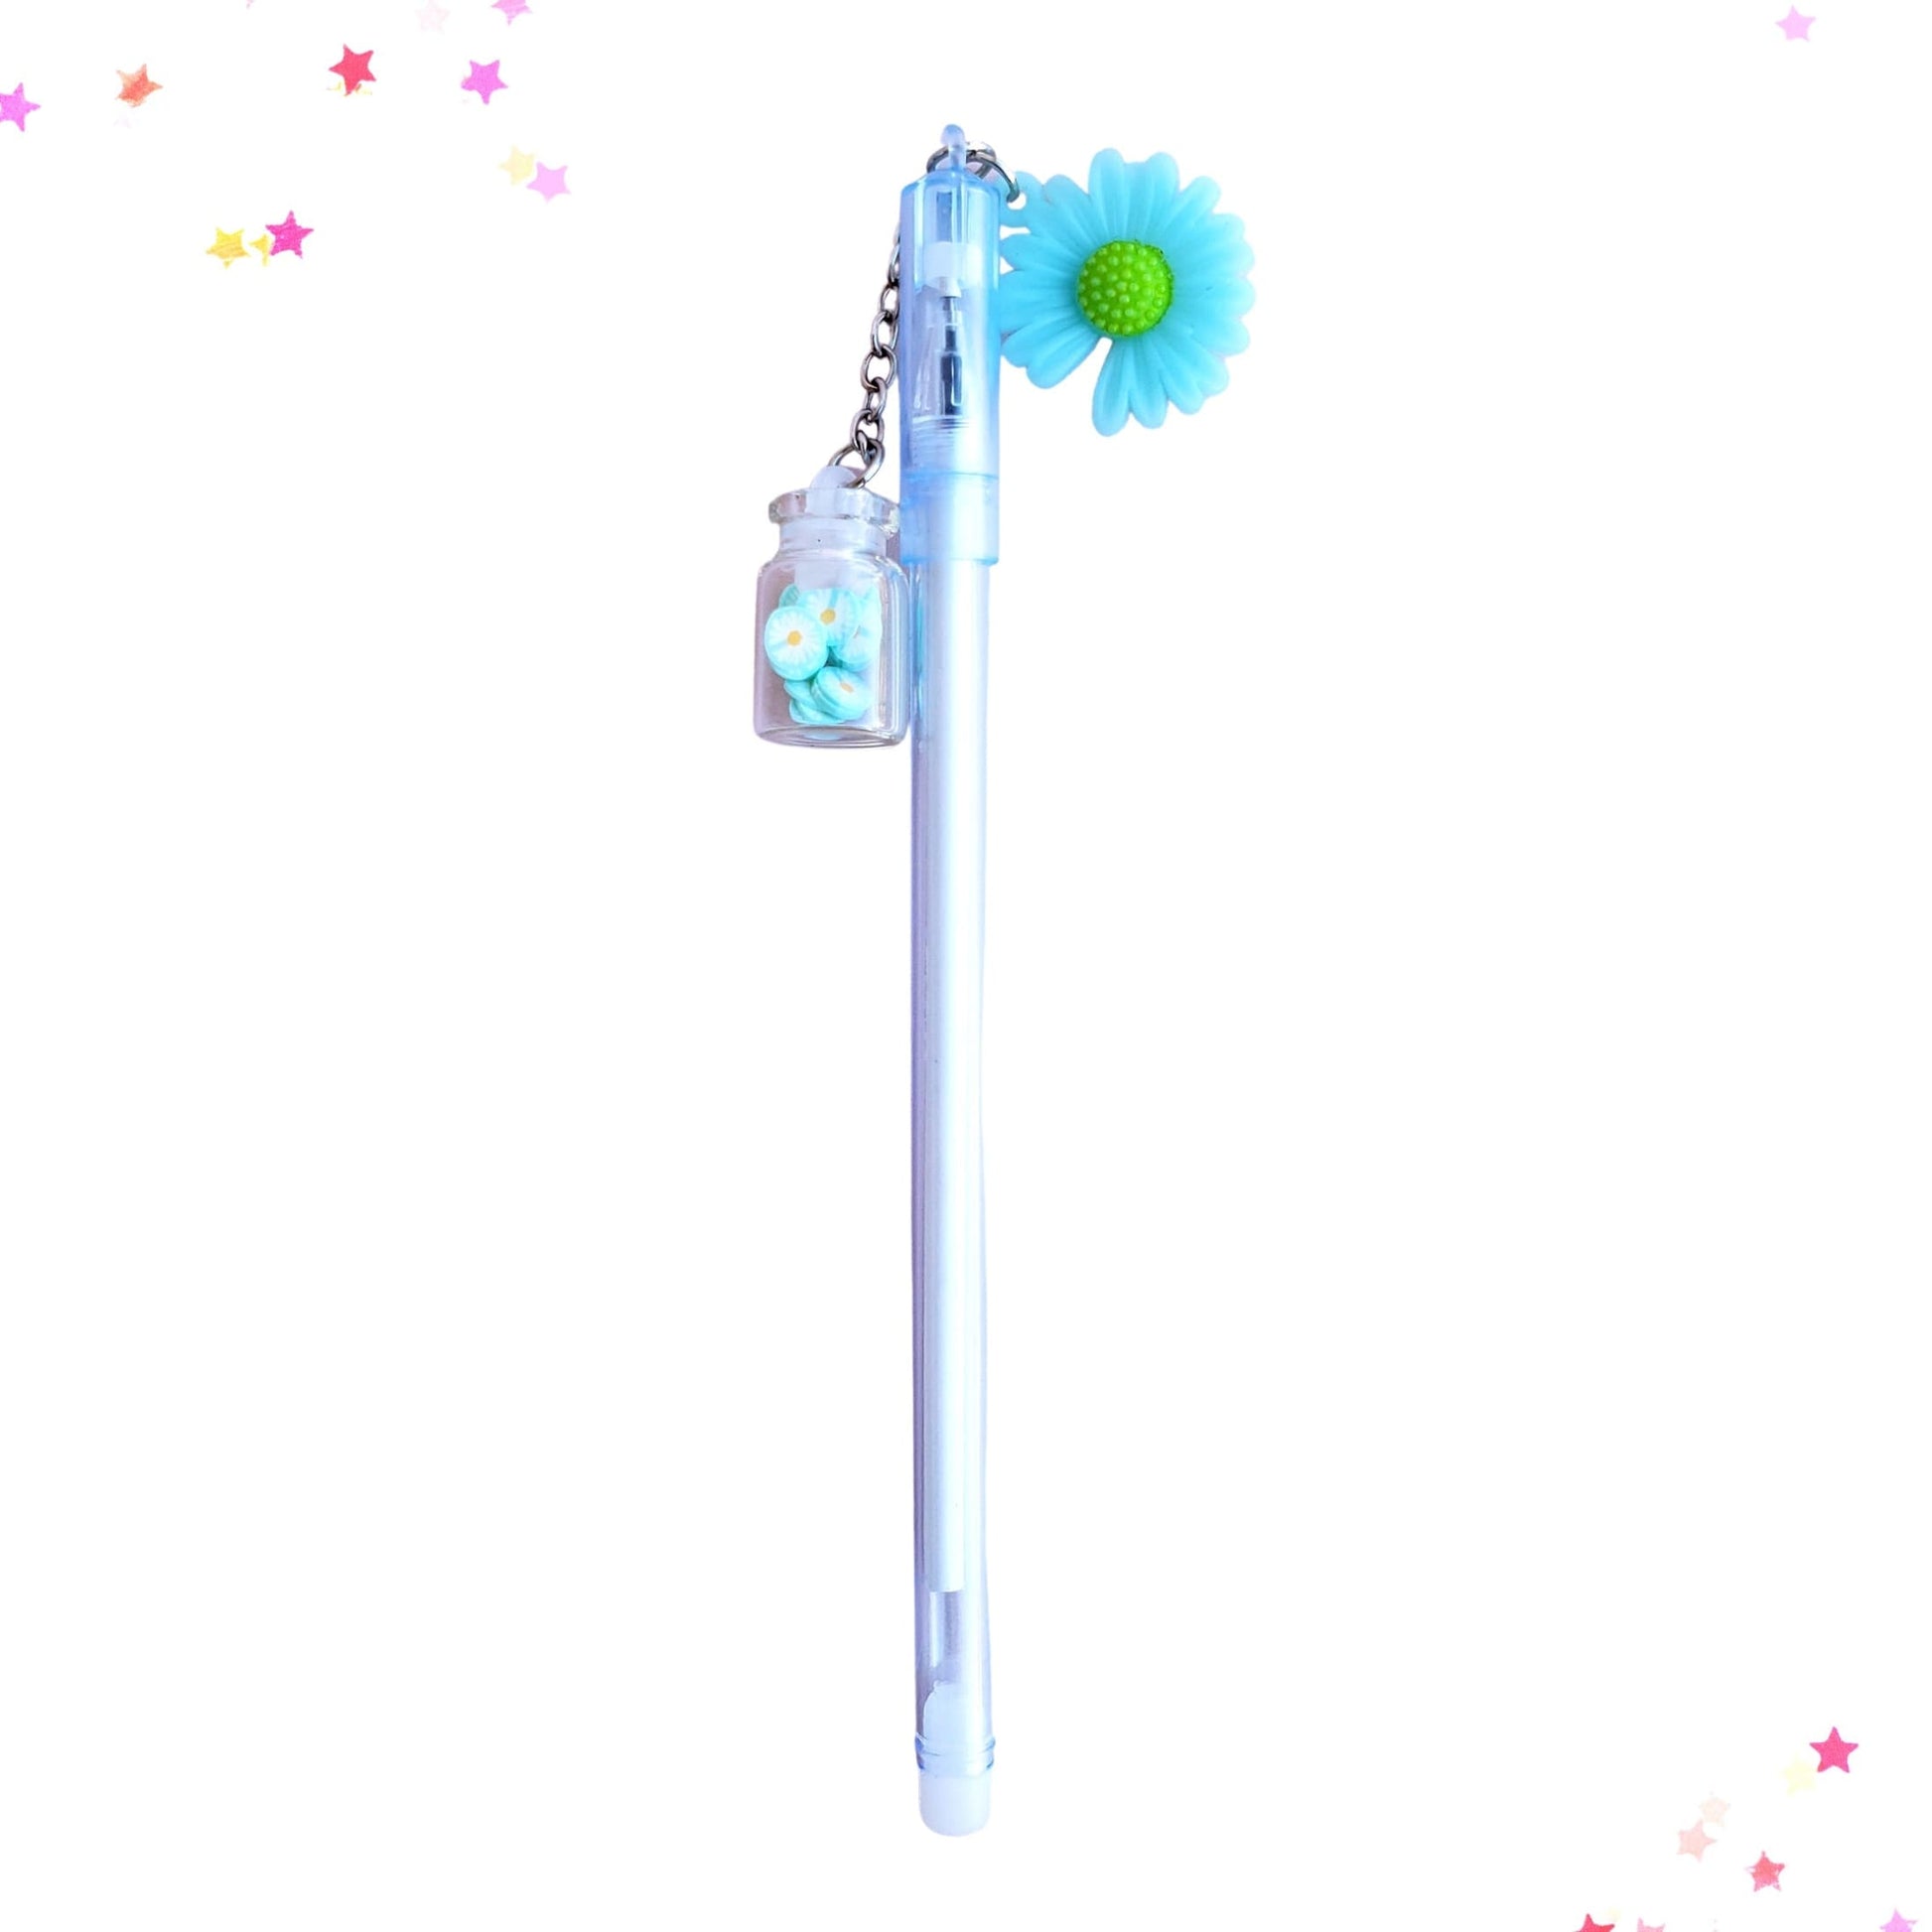 Daisy with Bottle Charm Gel Pen in Blue from Confetti Kitty, Only 2.99